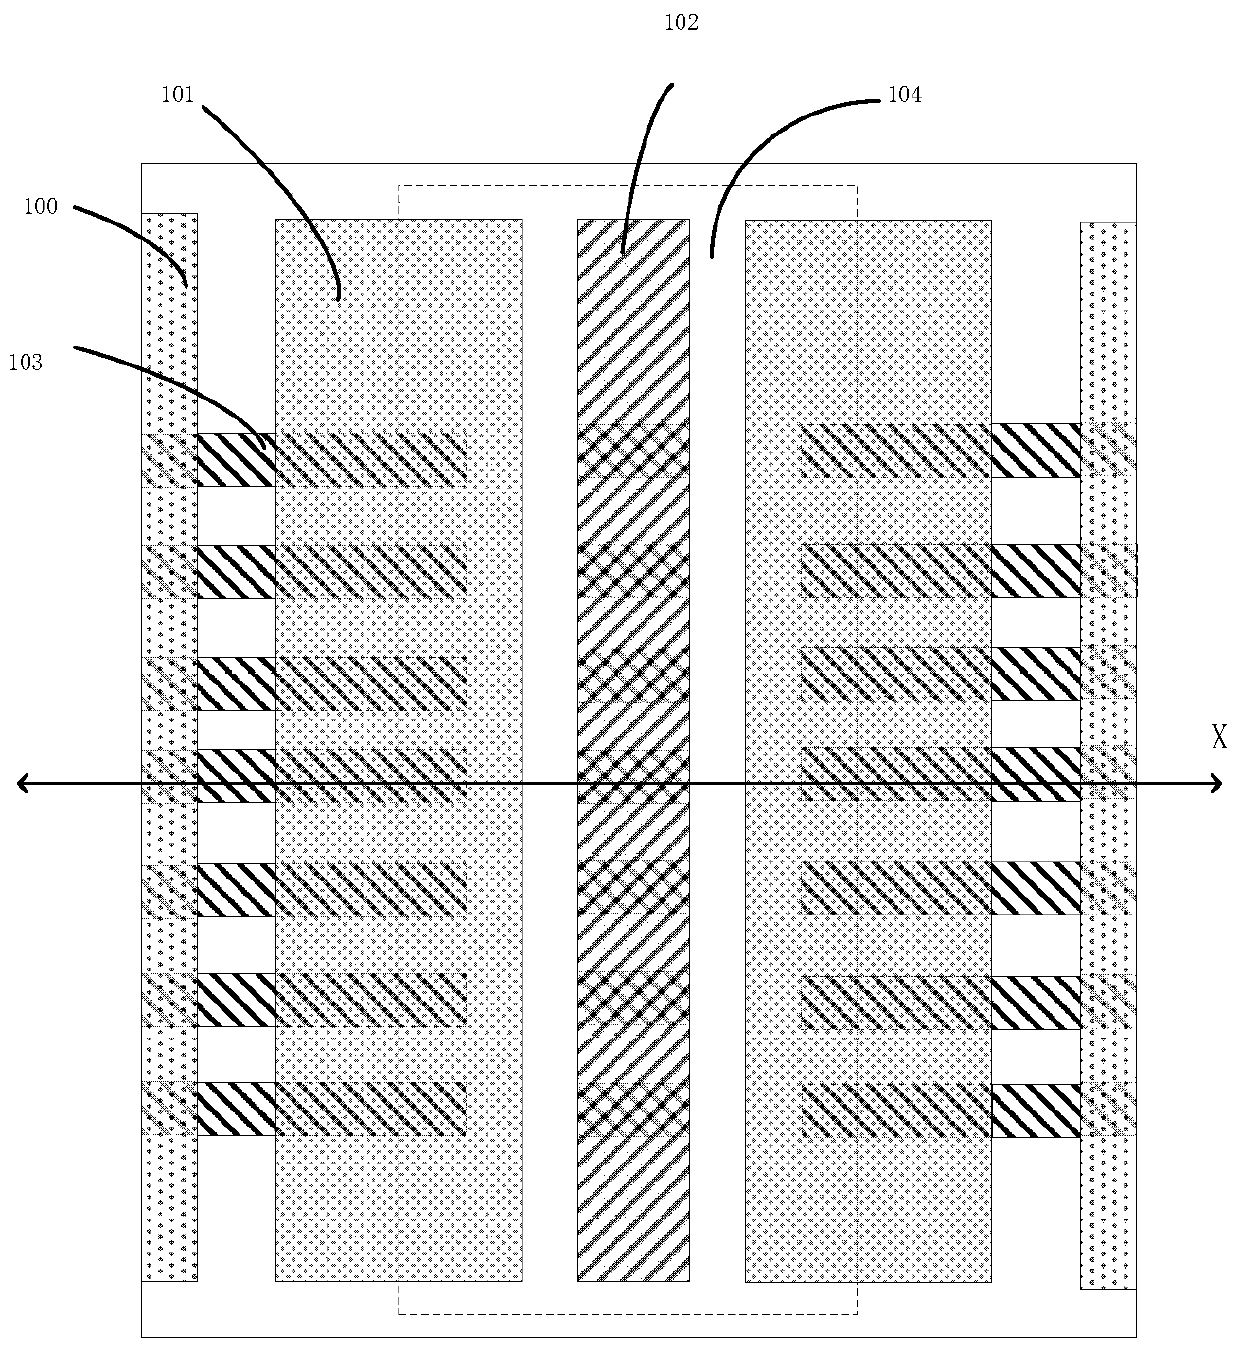 A lateral double-diffusion semiconductor device based on parasitic finfet